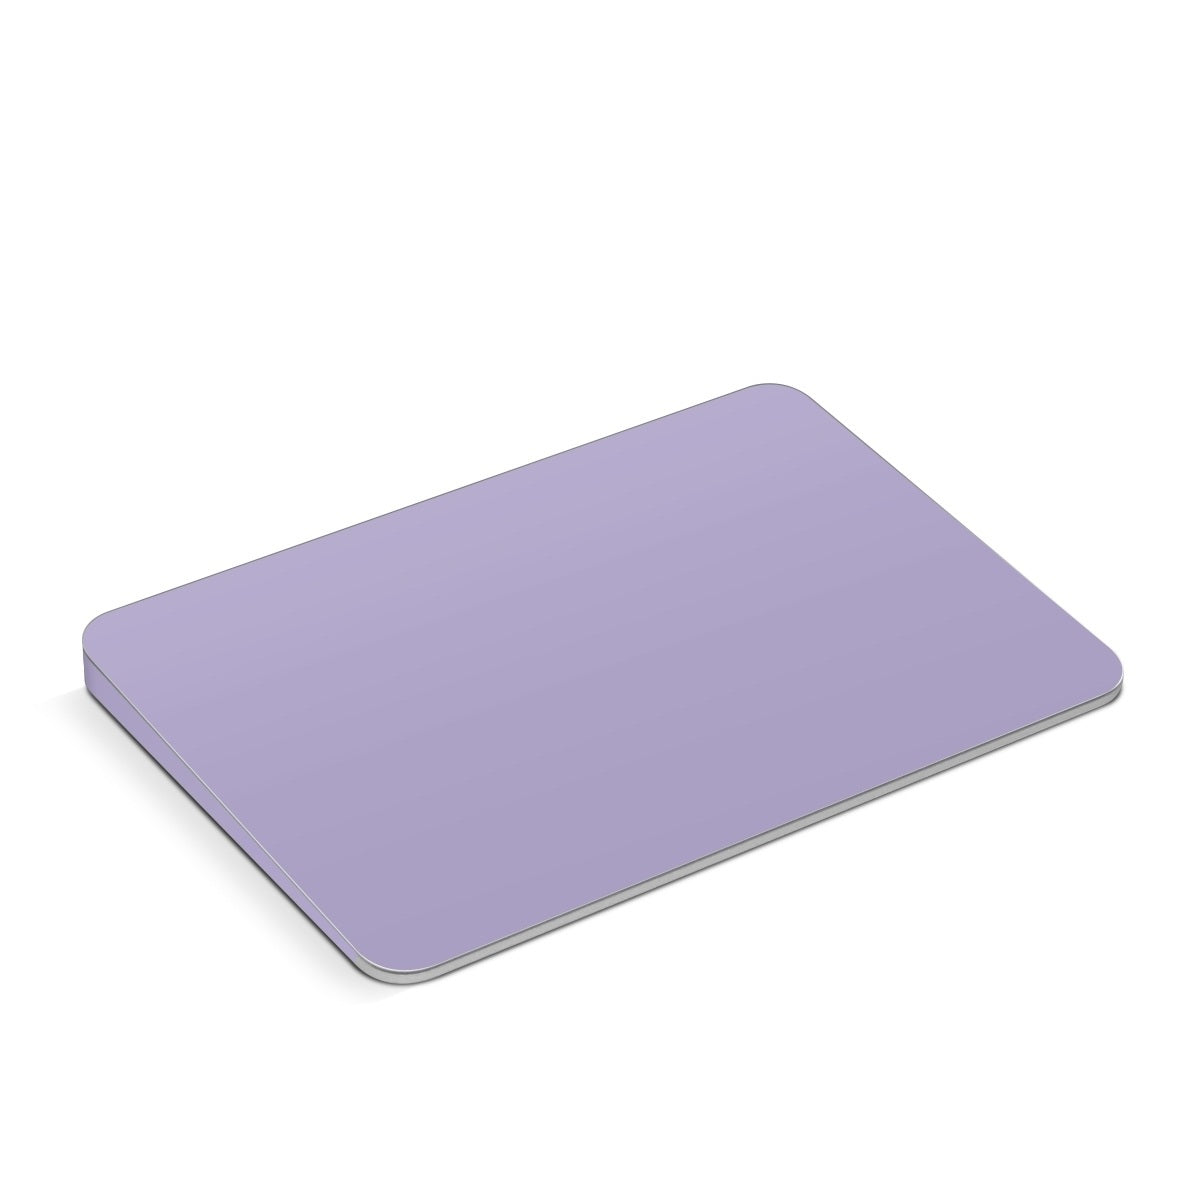 Solid State Lavender - Apple Magic Trackpad Skin